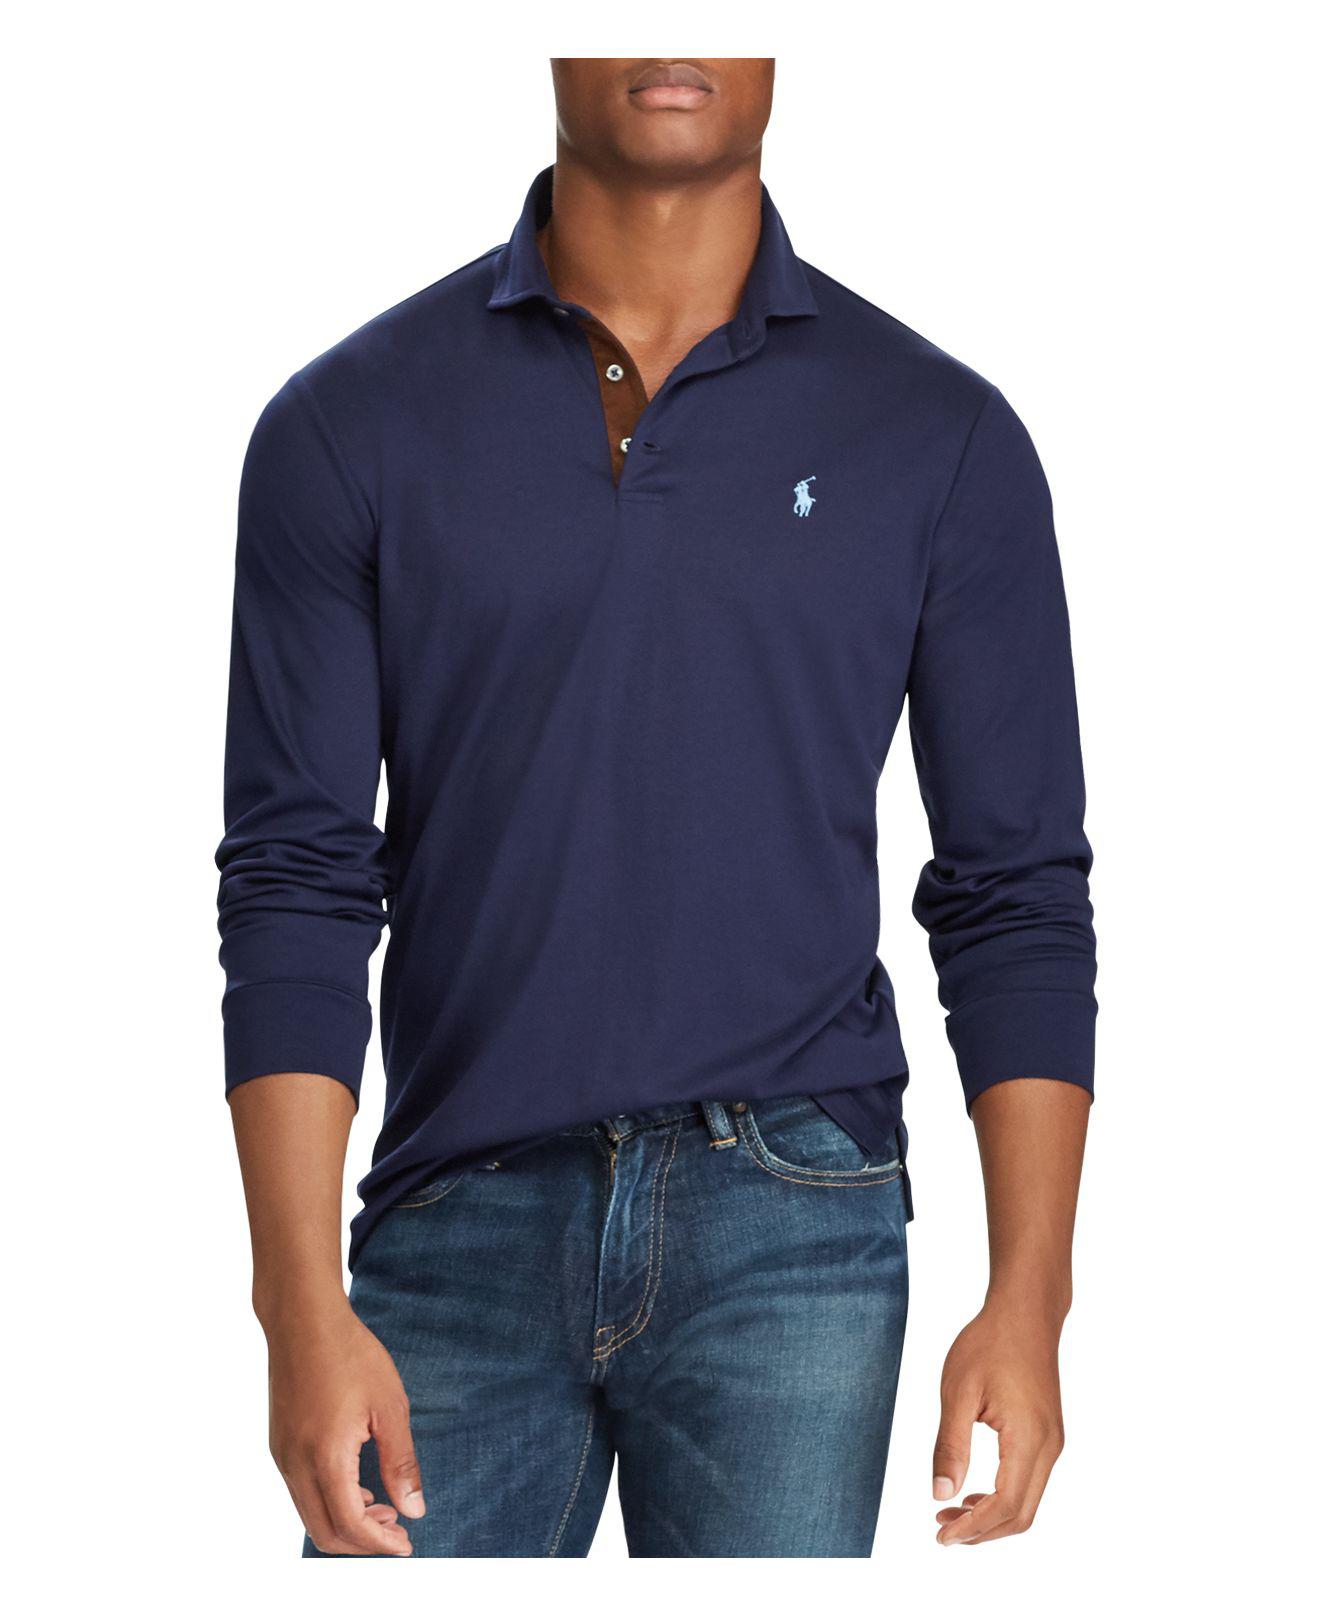 Polo Ralph Lauren Classic Fit Soft-touch Long Sleeve Polo Shirt in Navy ...